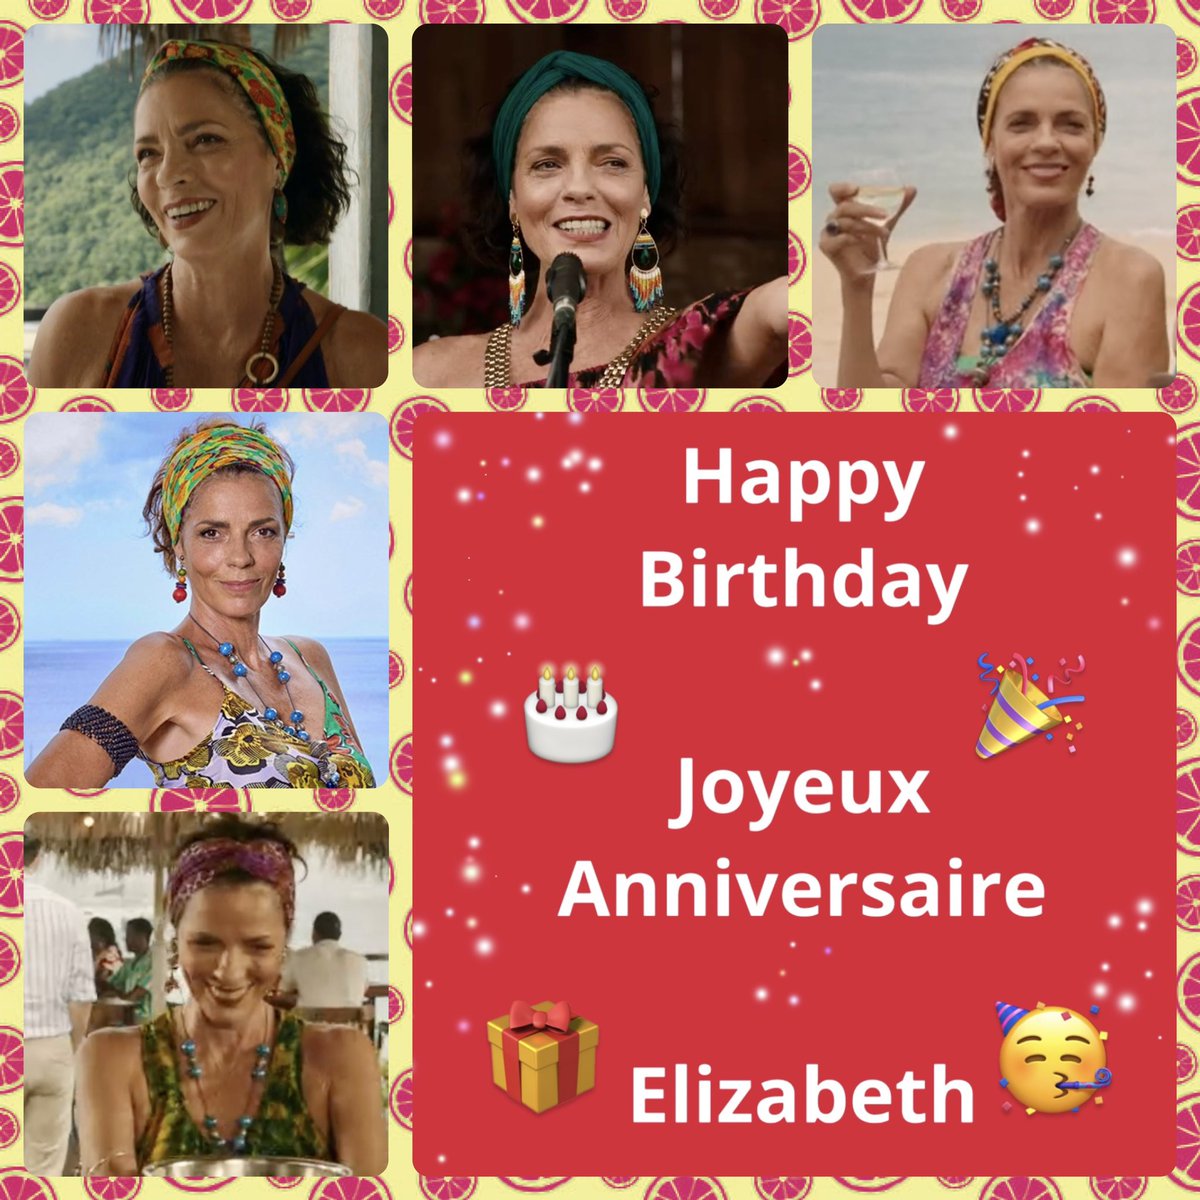 Happy Birthday / Joyeux Anniversaire @lizbourgine a.k.a. Mayor Catherine Bordey. Hope your day has been as special as you are! 

#catherinebordey #deathinparadise #happybirthday